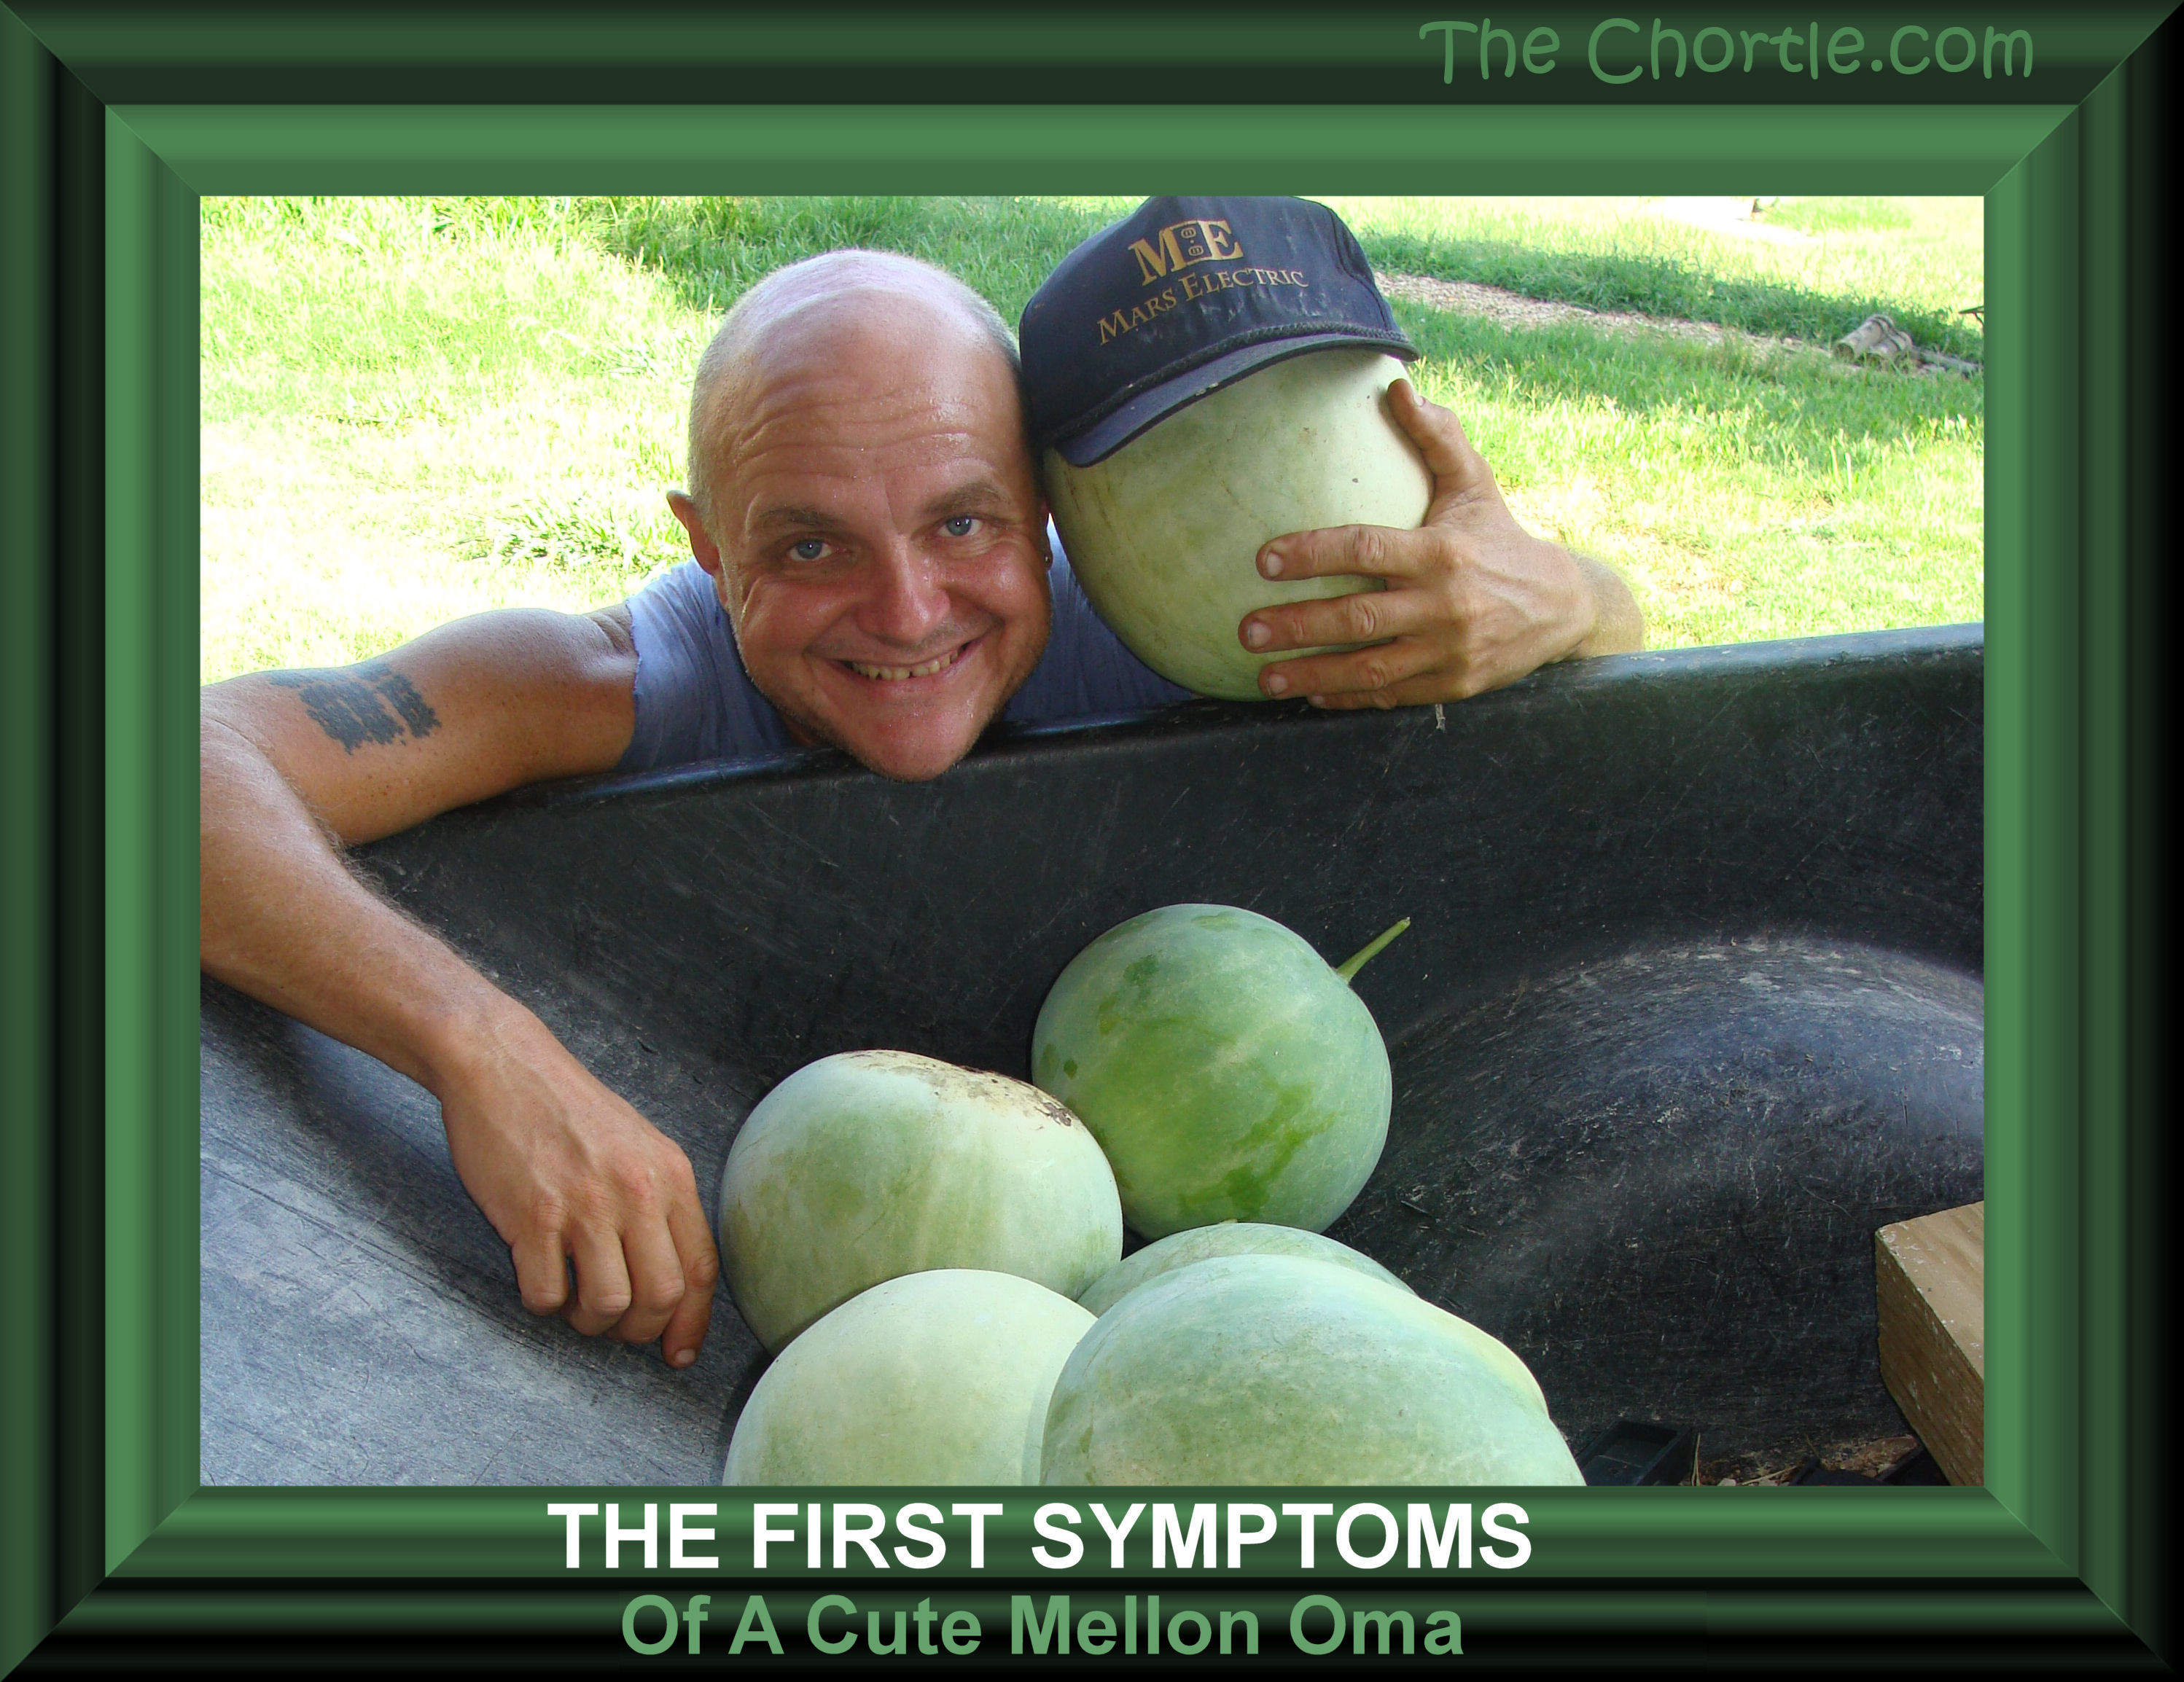 The first symptoms of a cute mellon Oma